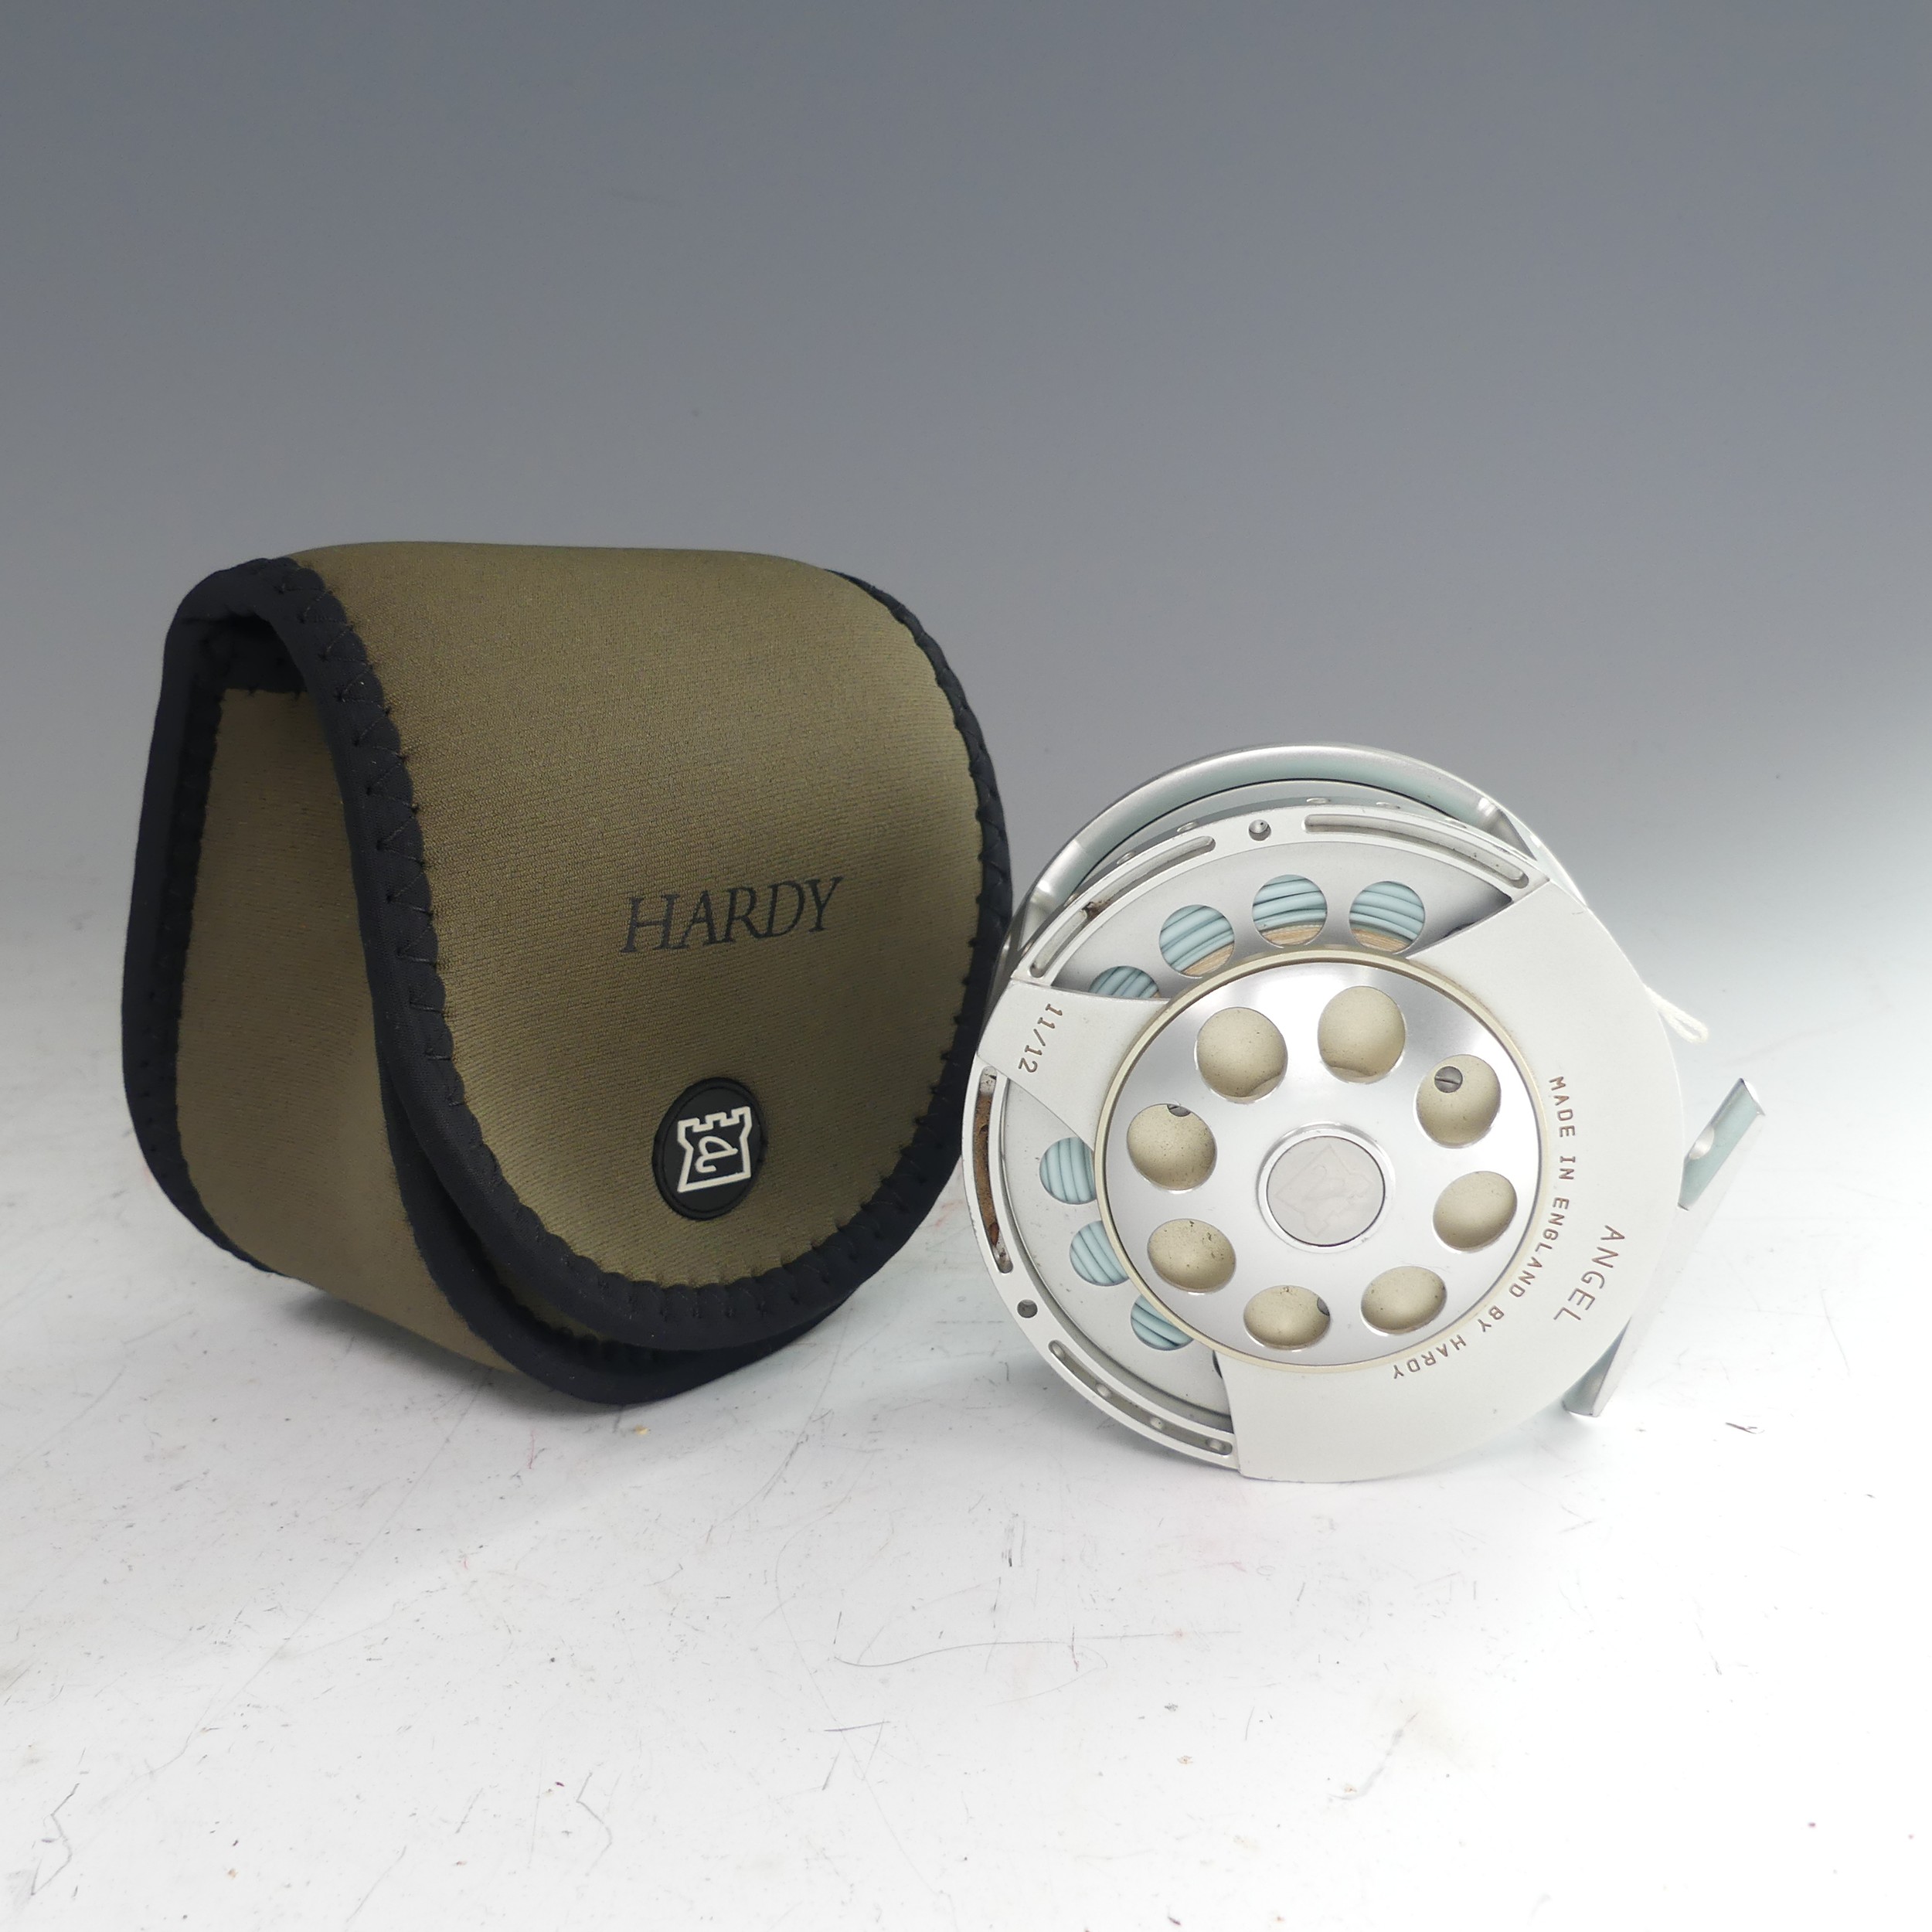 A Hardy Angel 11/12 fishing Reel, no. A26720, with Hardy pouch, 11.5cm diameter. - Image 4 of 5